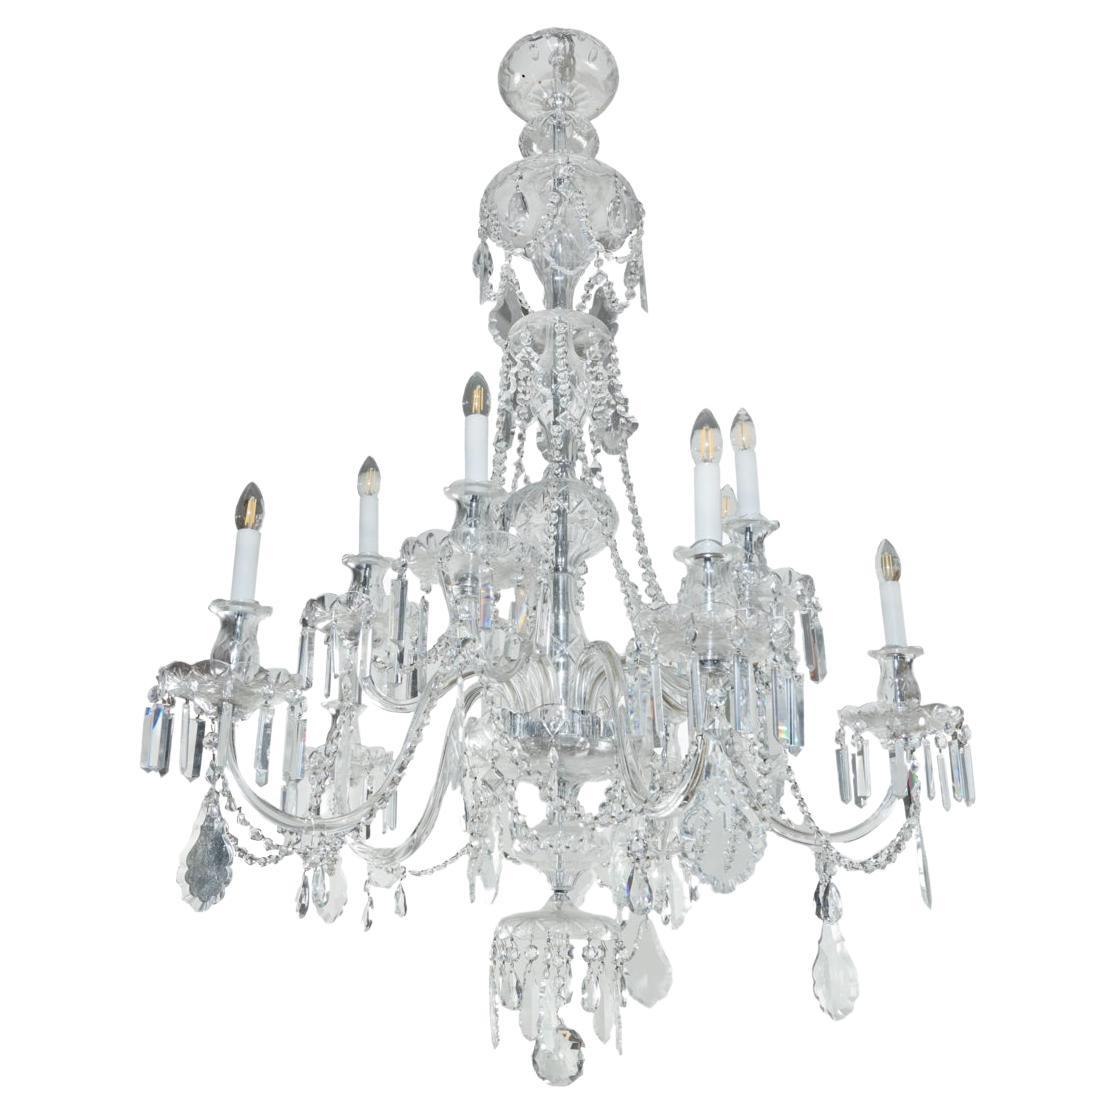 Early 20th Century English Glass Chandelier For Sale